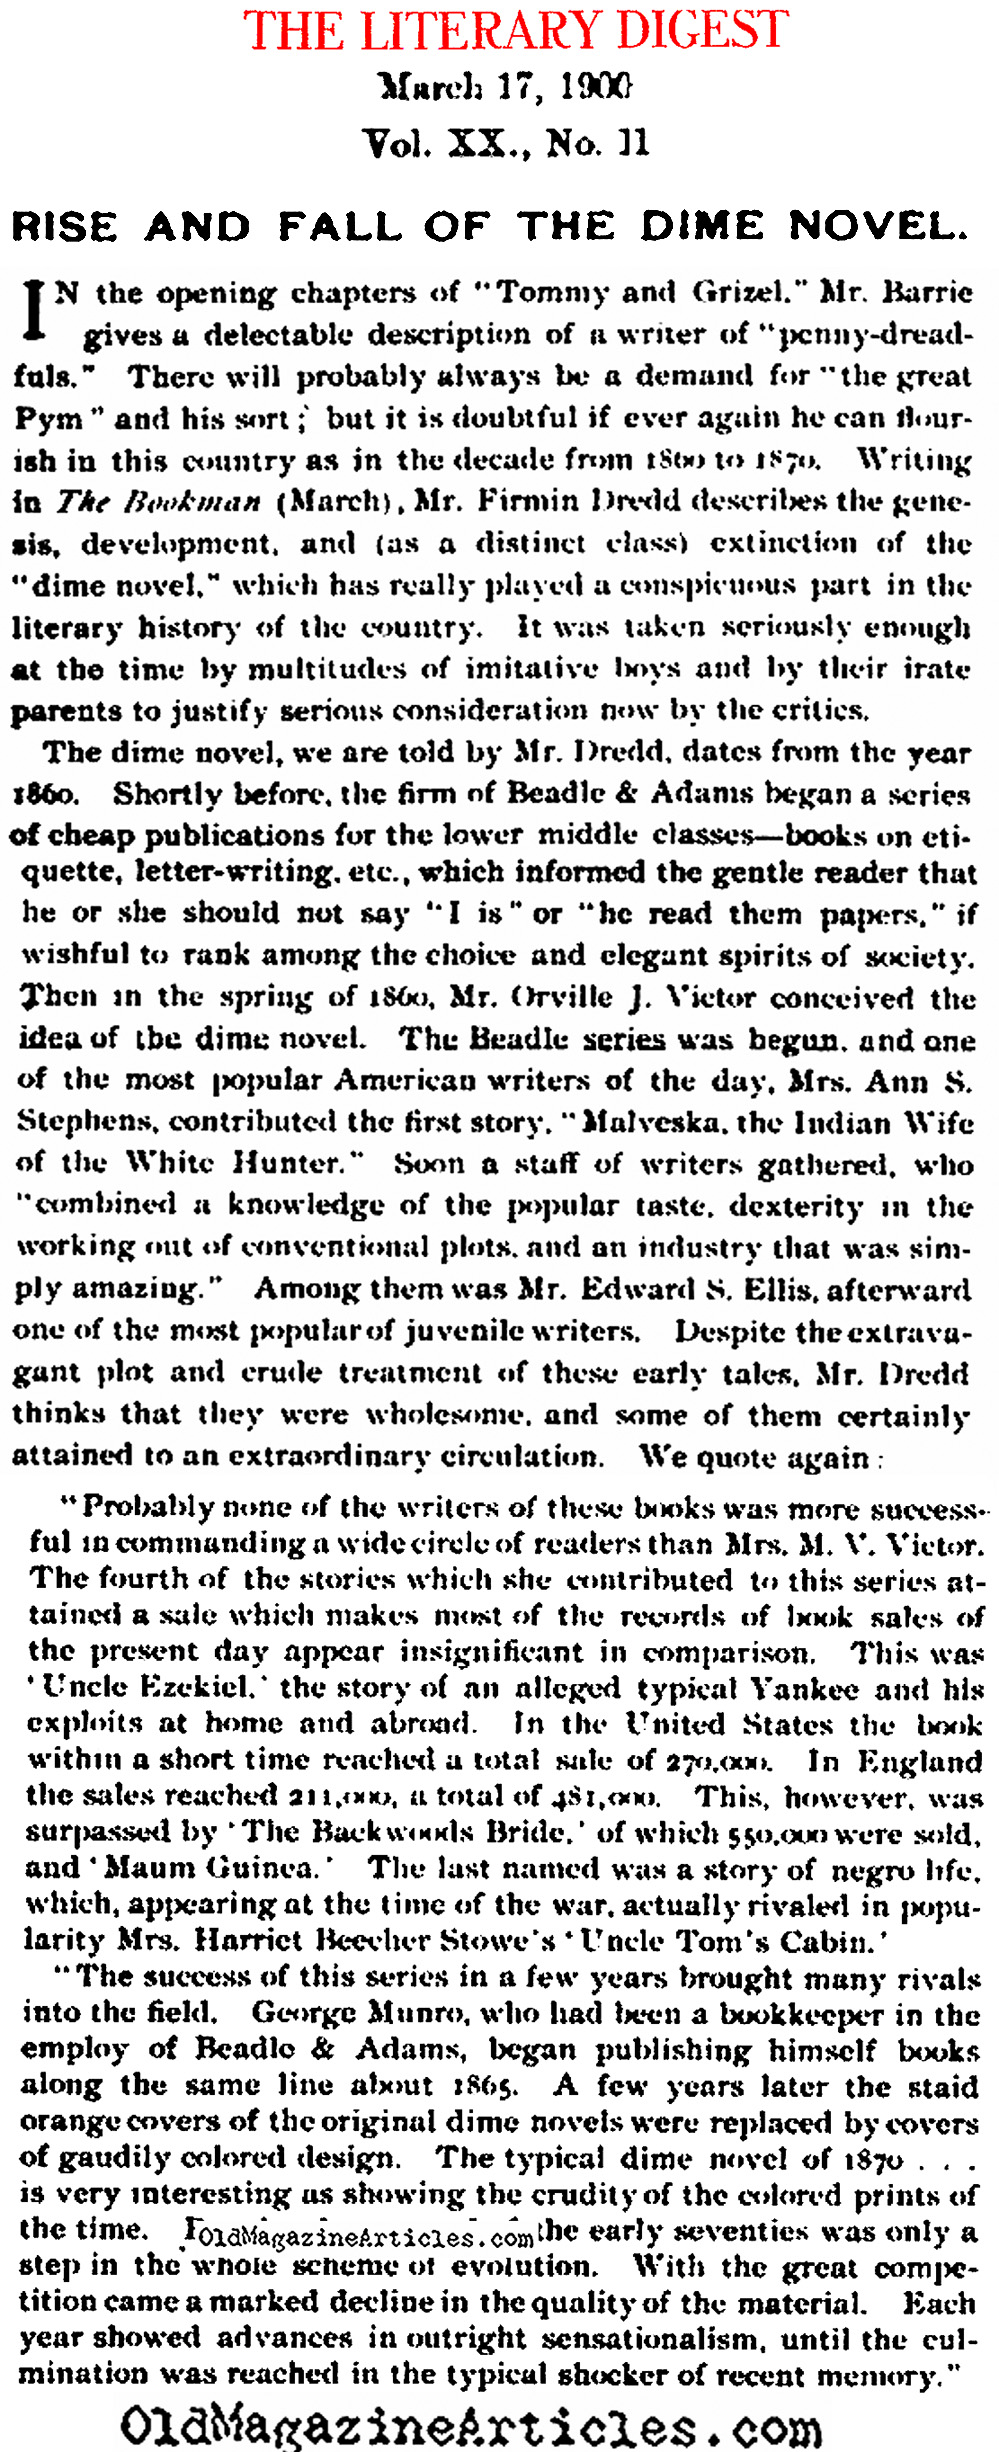 ''Rise and Fall of the Dime Novel'' (Literary Digest, 1900)